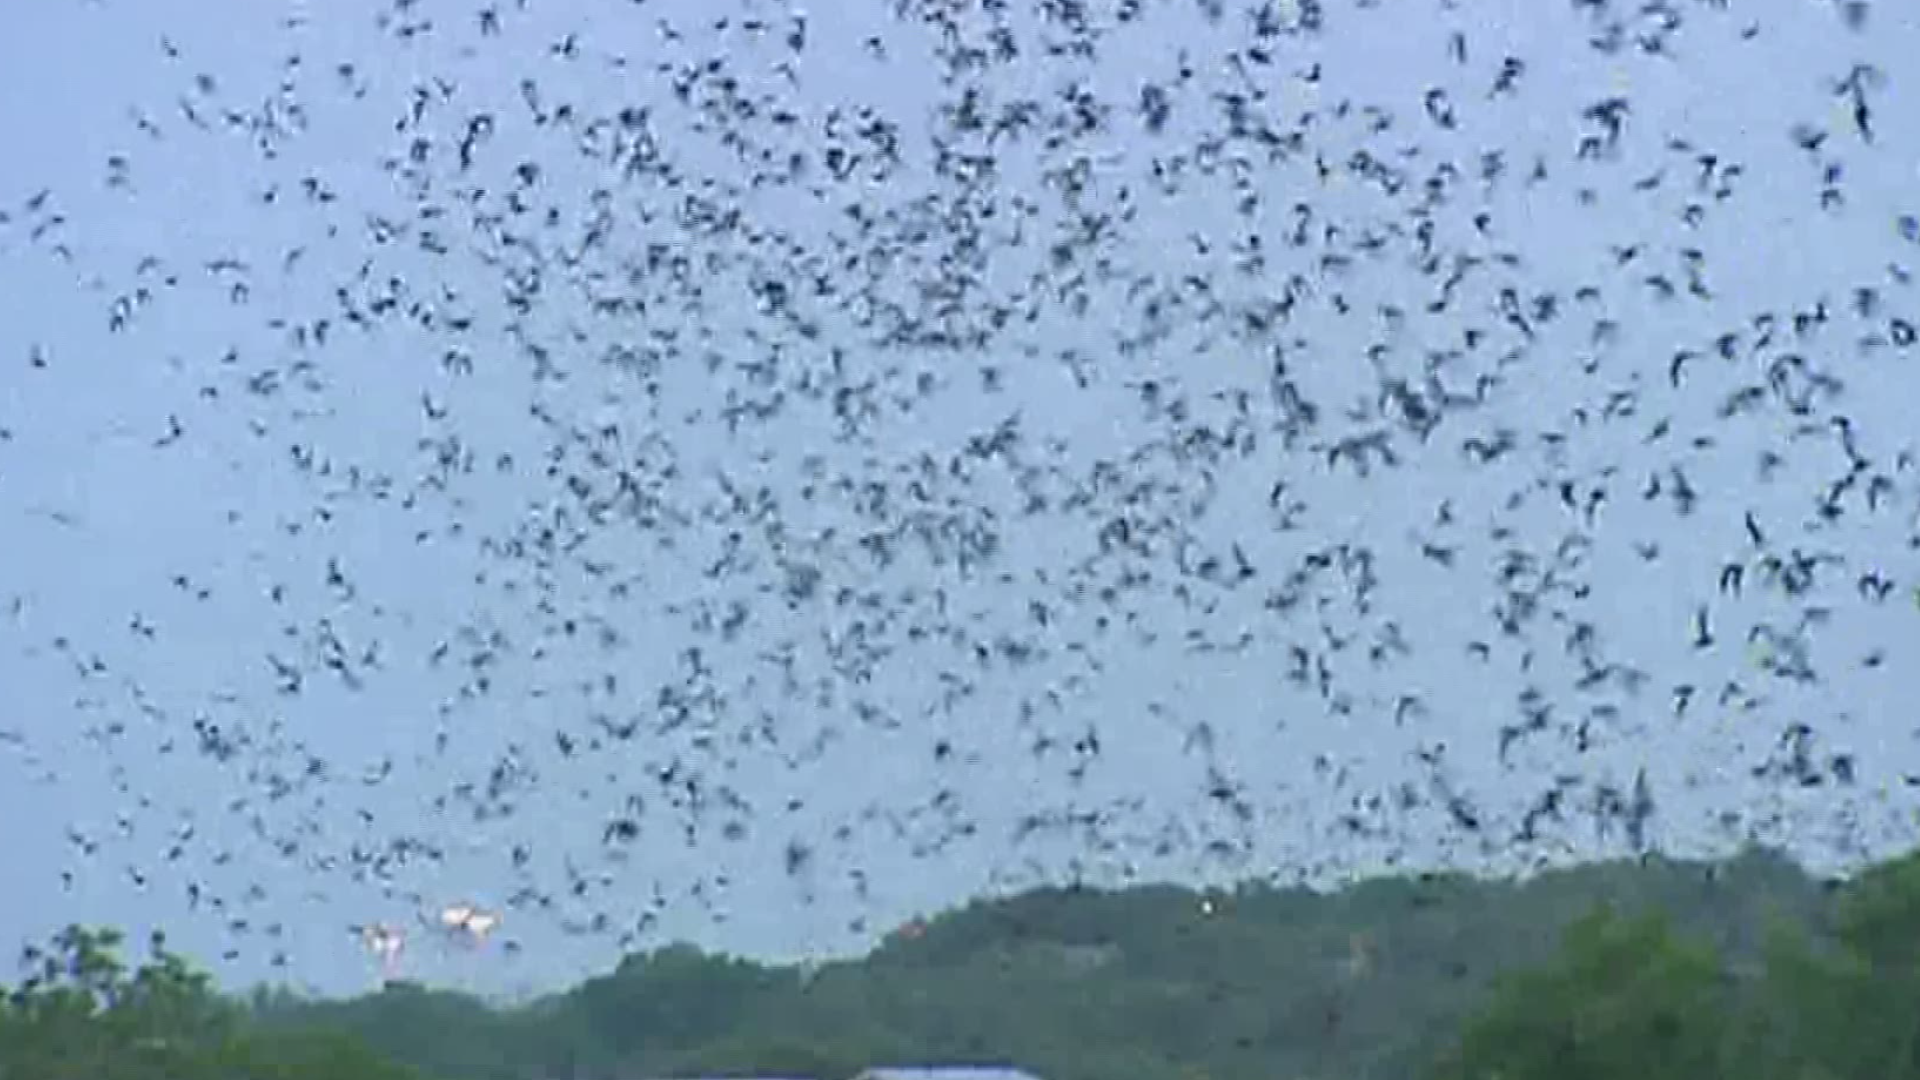 Biologists are working to figure out just how big of a threat this is to the state's bat population.